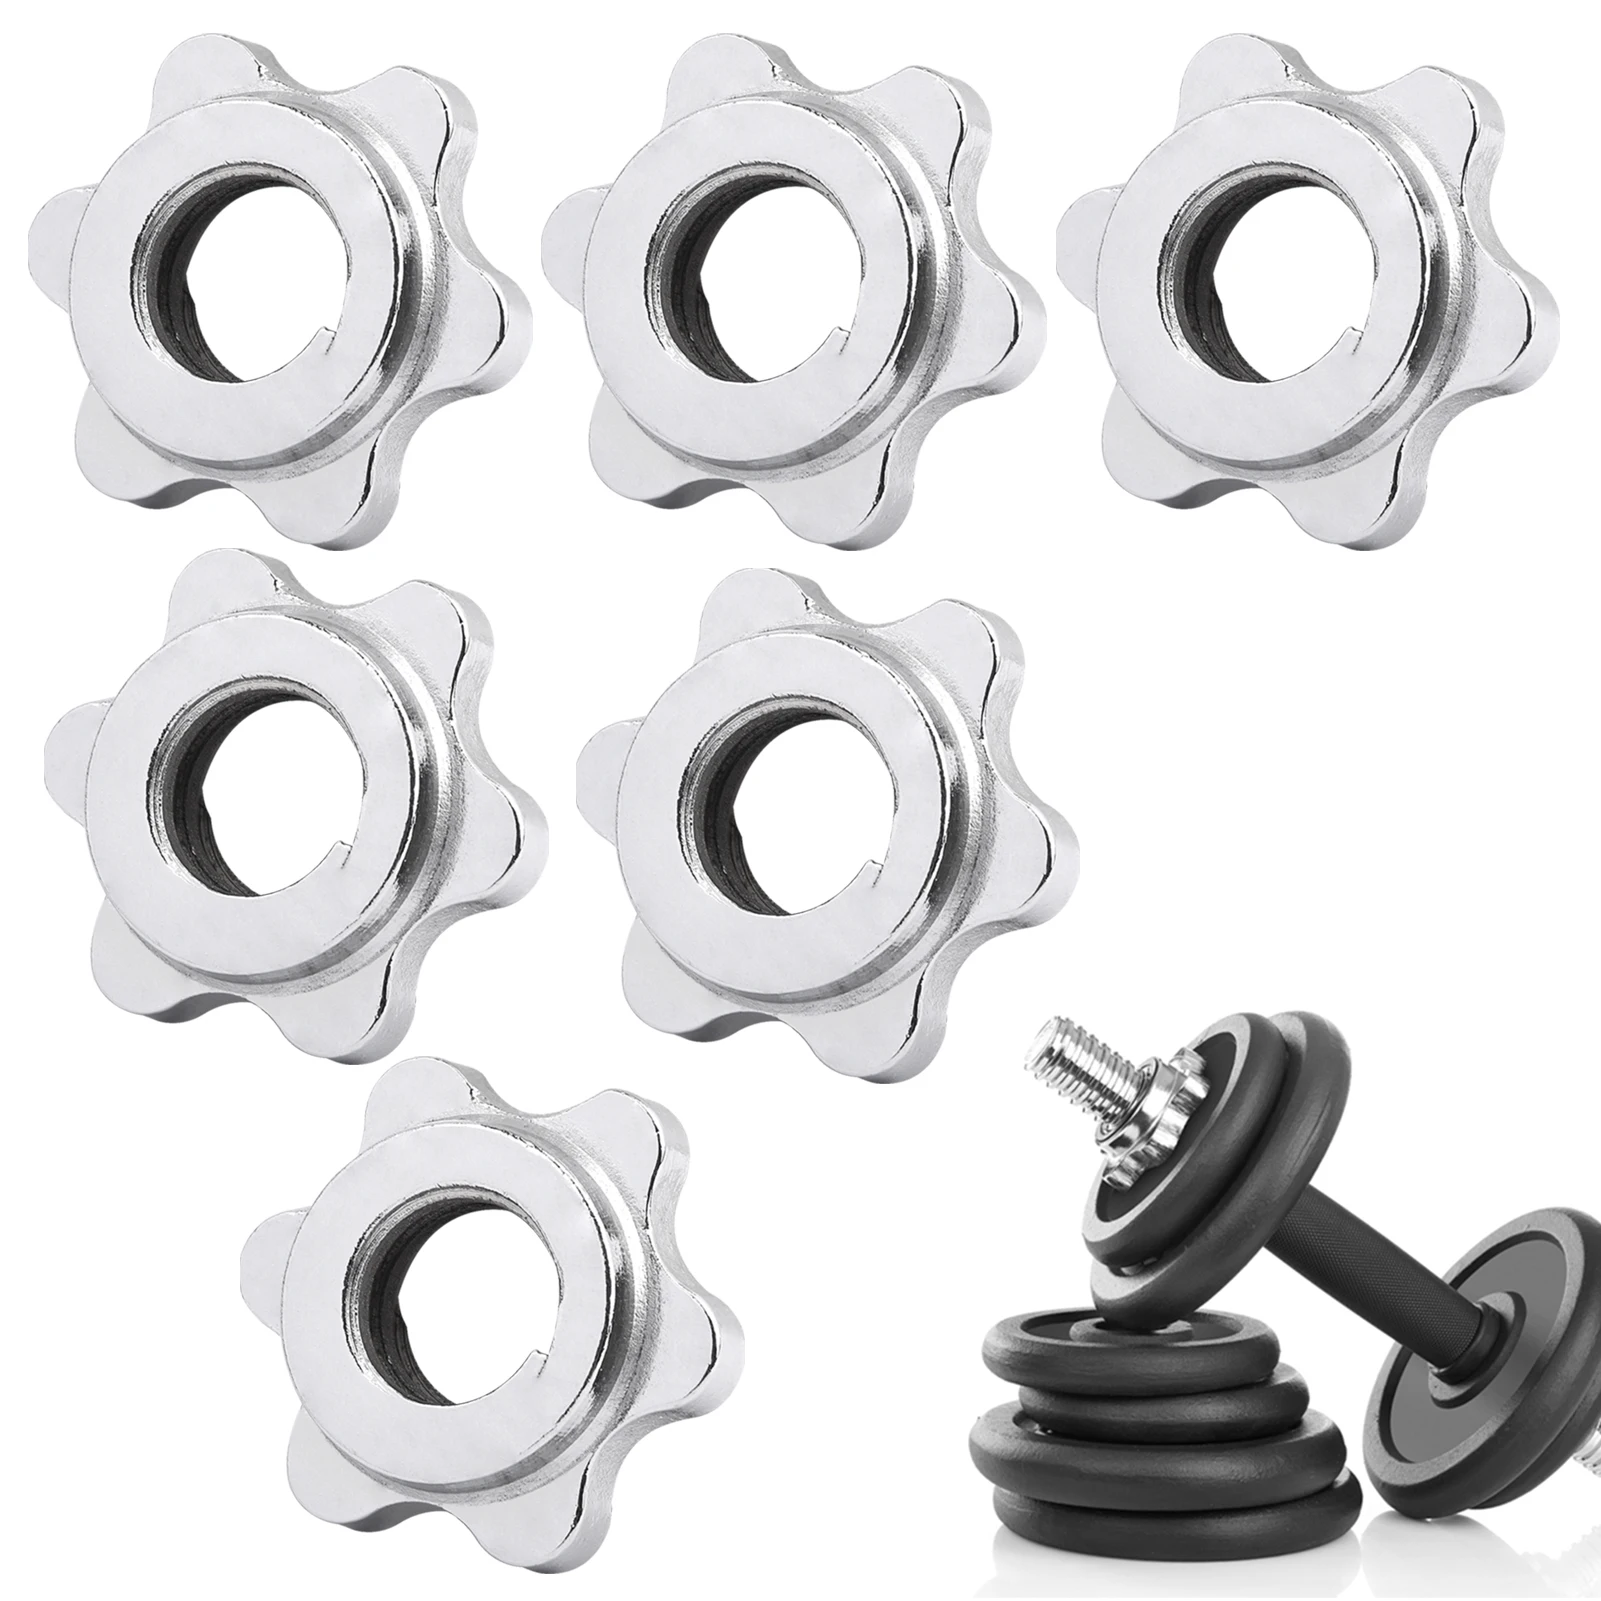 

6pcs Screw Spin Lock Collar Exercise Barbell Dumbbell Safety Accessories Anti Slip Fitness Cast Iron Hex Nut Cap Weight Training